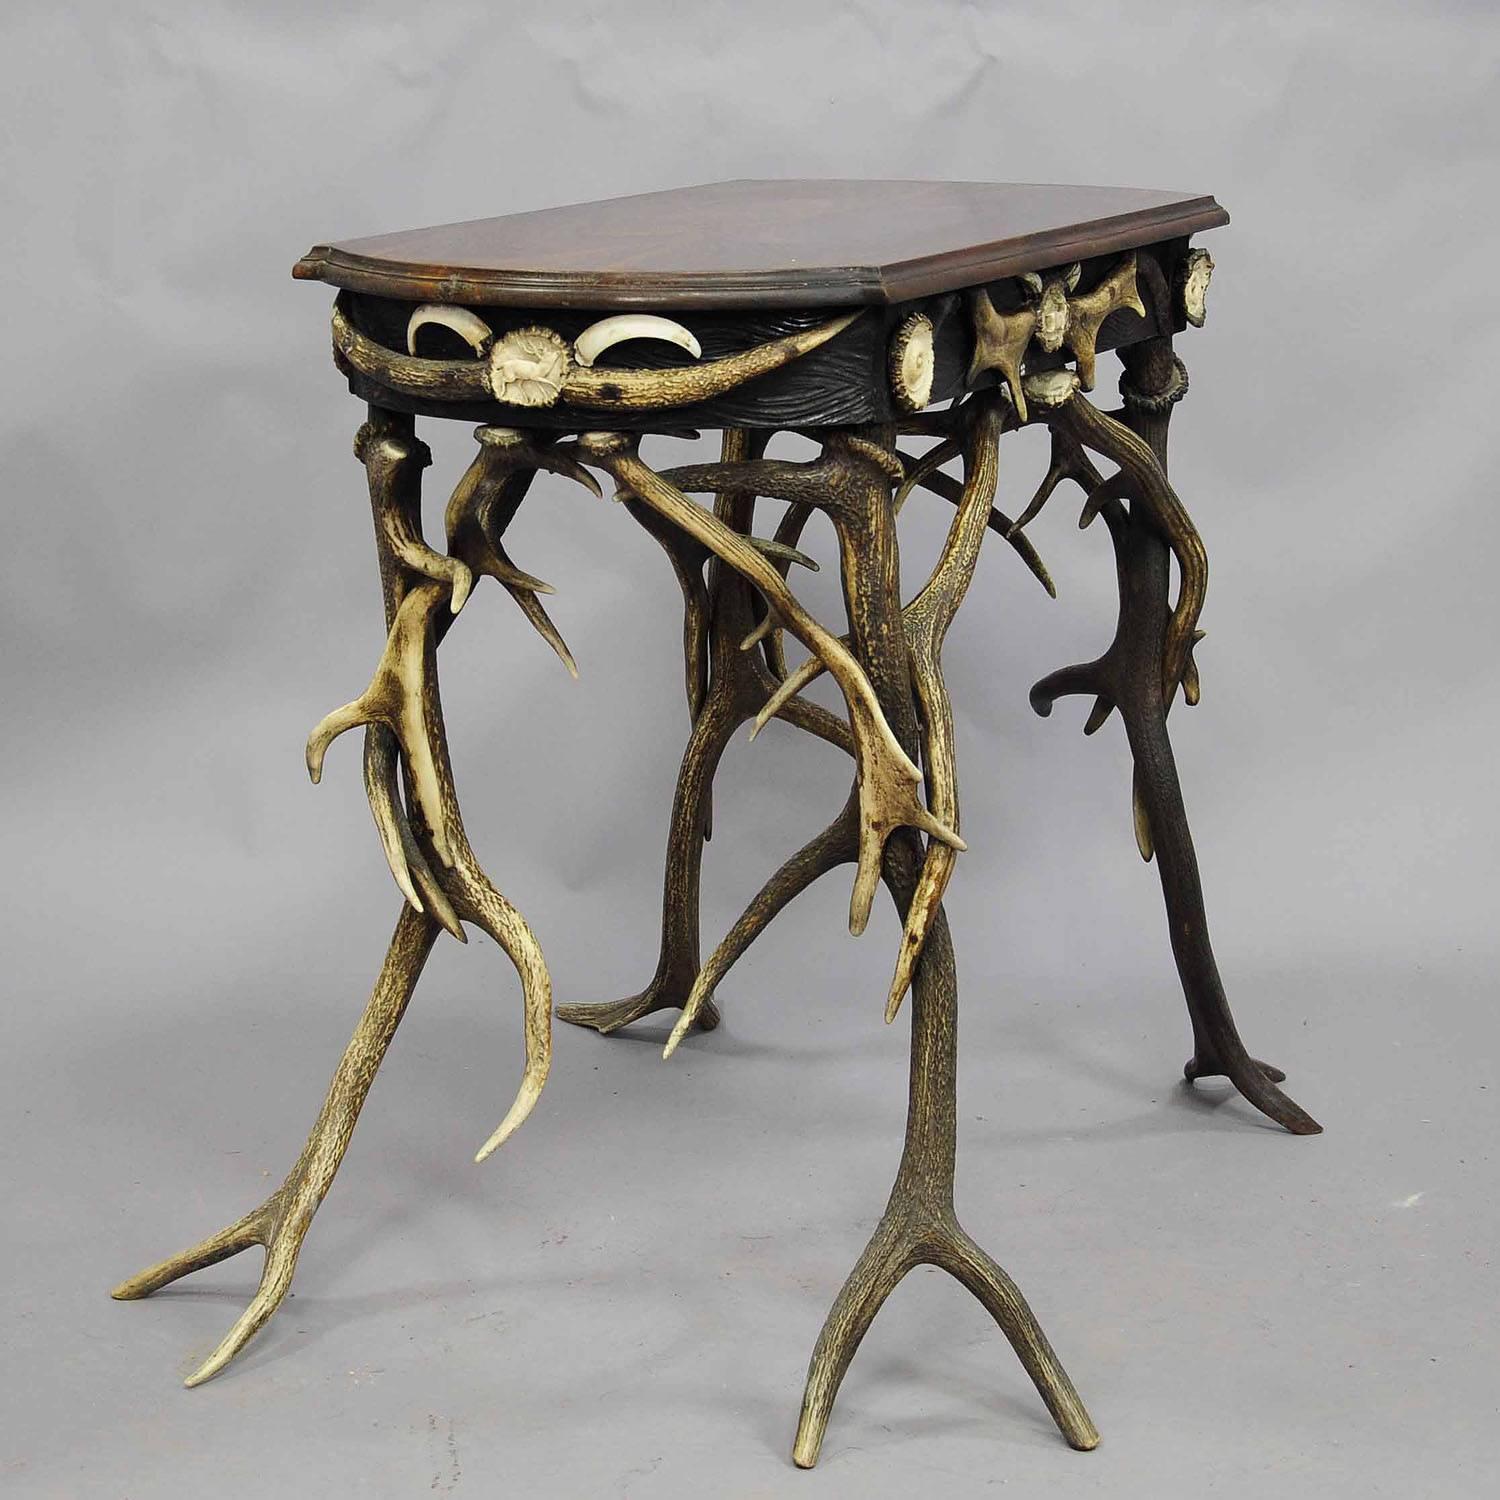 Rustic Superb Antler Side Table with great Decorations, circa 1890